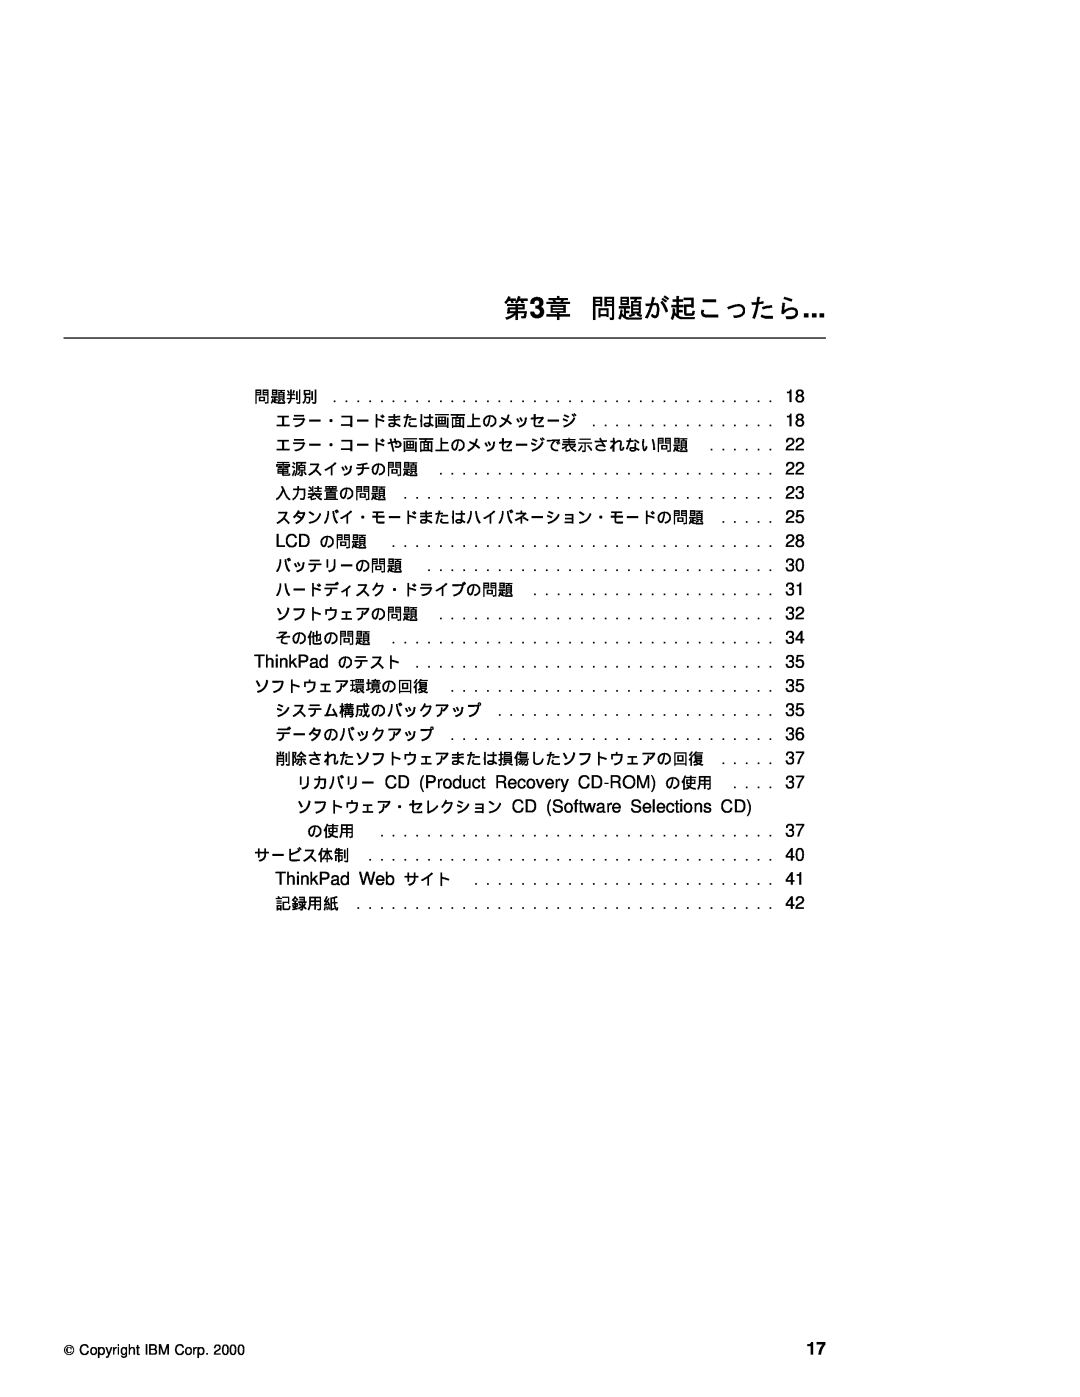 IBM T20 manual 第3章 問題が起こったら, リカバリー CD Product Recovery CD-ROM の使用, ソフトウェア・セレクション CD Software Selections CD 